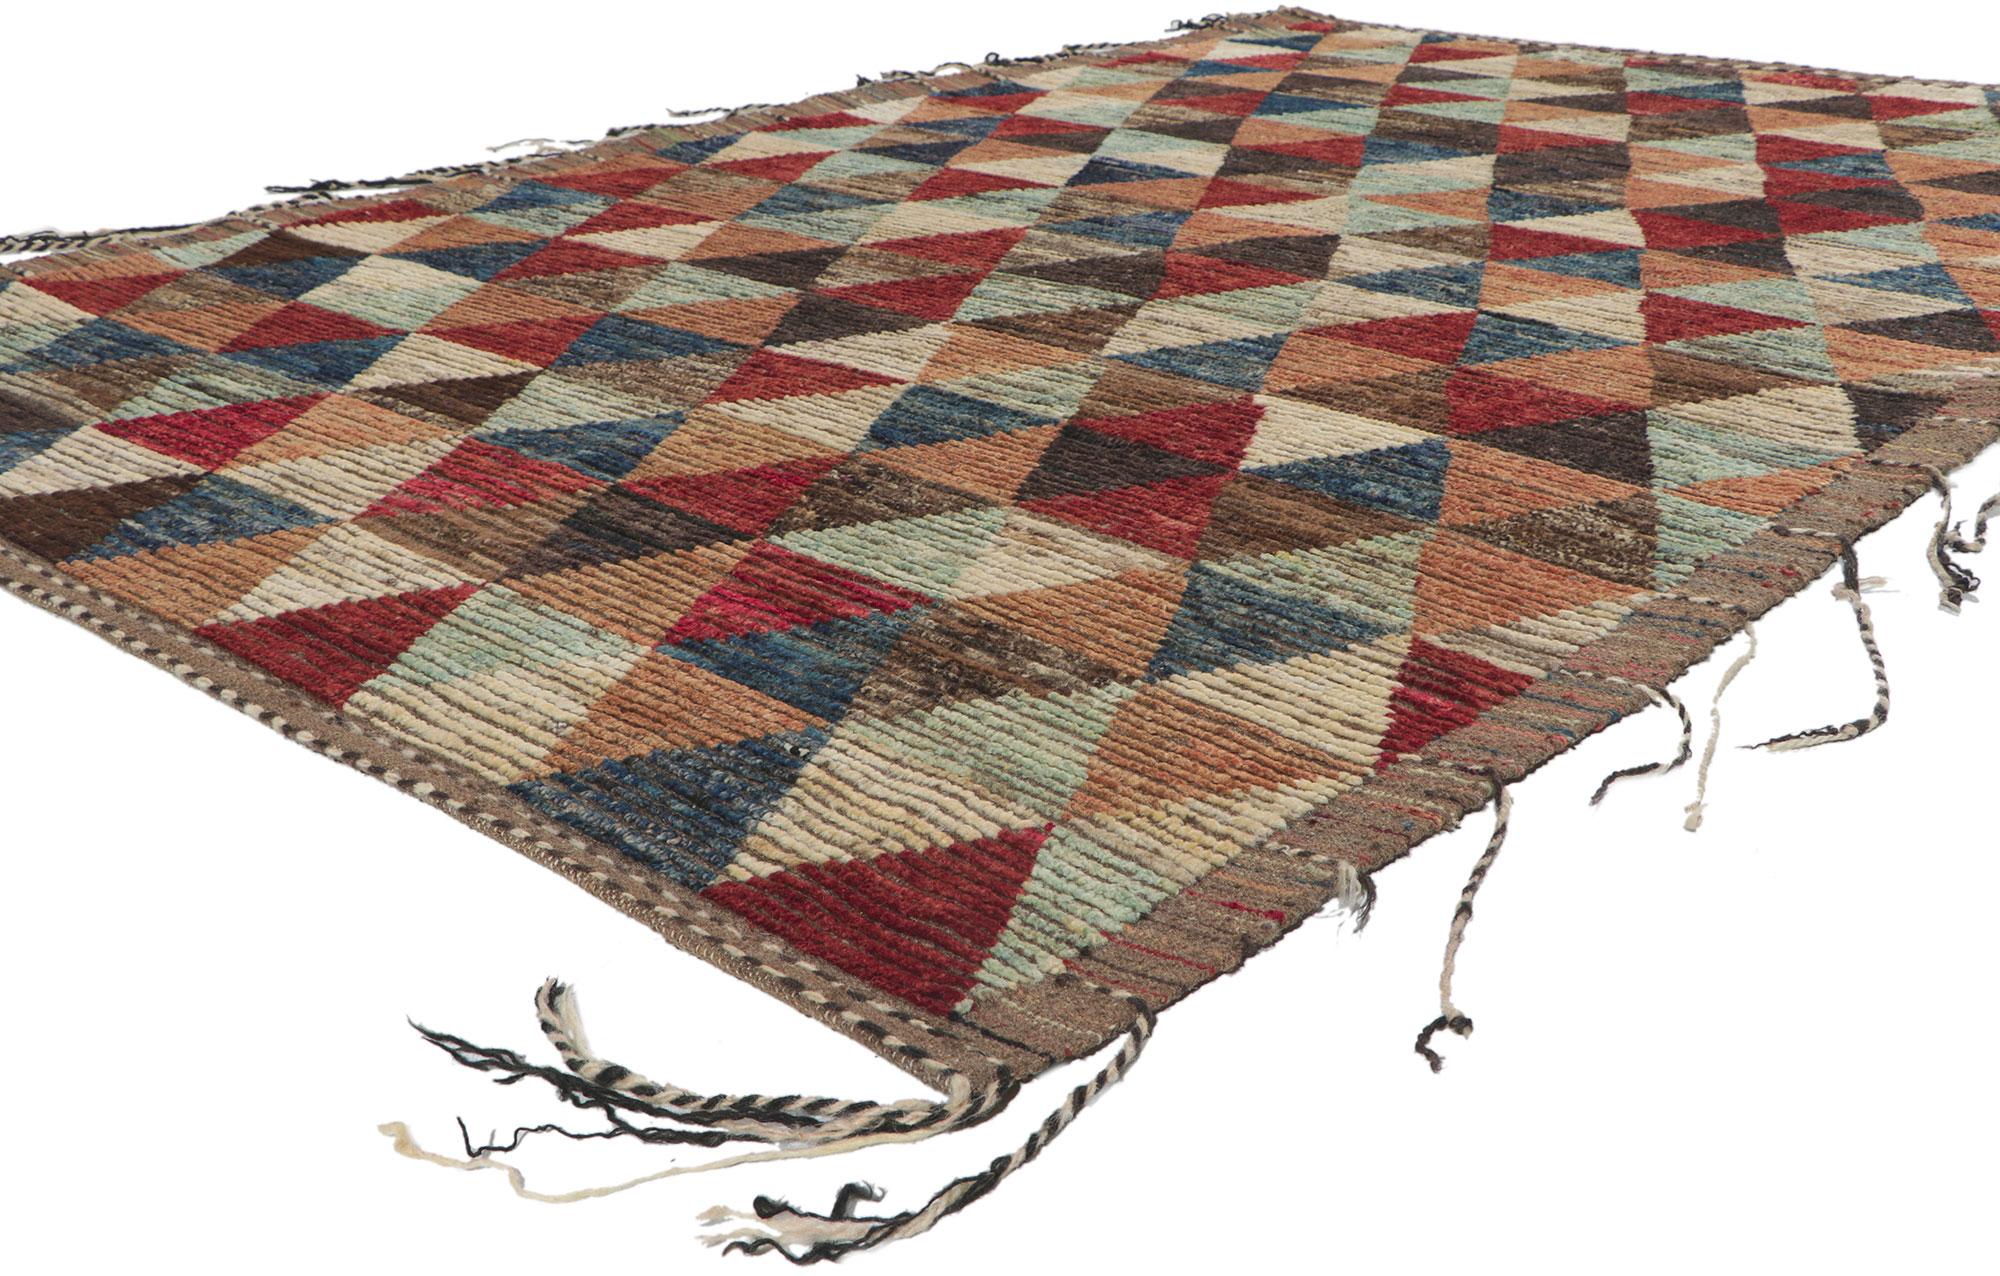 80787 New Contemporary Moroccan rug with short pile 06'01 x 09'01. ?With its nomadic charm, incredible detail and texture, this hand knotted wool contemporary Moroccan rug is a captivating vision of woven beauty. The eye-catching quilt-like